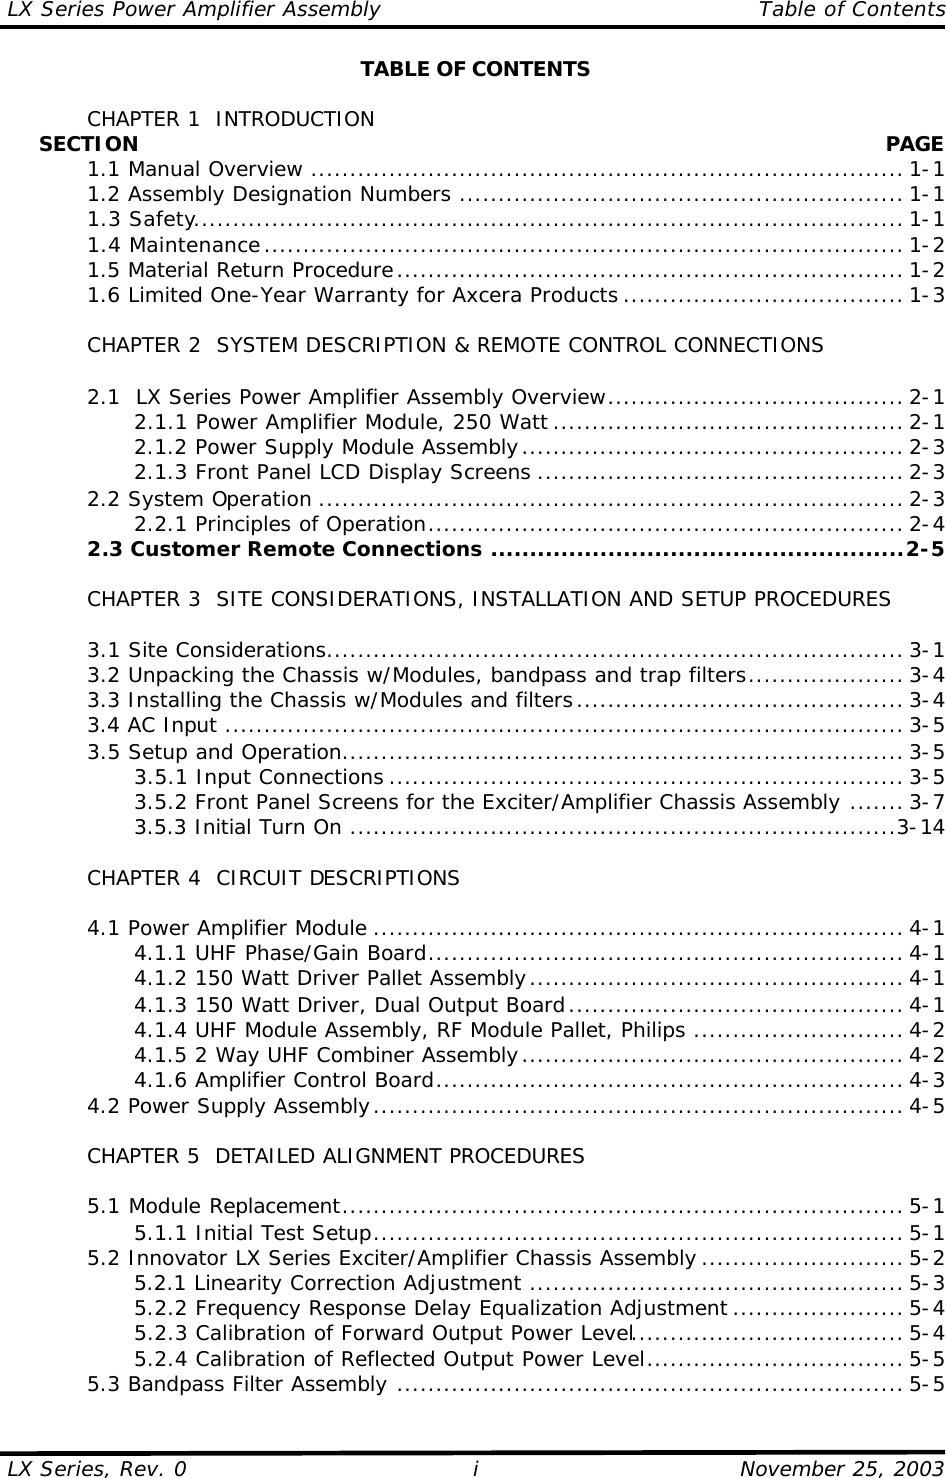 LX Series Power Amplifier Assembly    Table of Contents  LX Series, Rev. 0    November 25, 2003 i TABLE OF CONTENTS   CHAPTER 1  INTRODUCTION      SECTION    PAGE  1.1 Manual Overview ............................................................................ 1-1  1.2 Assembly Designation Numbers ......................................................... 1-1  1.3 Safety........................................................................................... 1-1  1.4 Maintenance.................................................................................. 1-2  1.5 Material Return Procedure................................................................. 1-2  1.6 Limited One-Year Warranty for Axcera Products .................................... 1-3   CHAPTER 2  SYSTEM DESCRIPTION &amp; REMOTE CONTROL CONNECTIONS   2.1  LX Series Power Amplifier Assembly Overview...................................... 2-1     2.1.1 Power Amplifier Module, 250 Watt ............................................. 2-1     2.1.2 Power Supply Module Assembly................................................. 2-3     2.1.3 Front Panel LCD Display Screens ............................................... 2-3  2.2 System Operation ........................................................................... 2-3     2.2.1 Principles of Operation............................................................. 2-4  2.3 Customer Remote Connections .....................................................2-5       CHAPTER 3  SITE CONSIDERATIONS, INSTALLATION AND SETUP PROCEDURES     3.1 Site Considerations.......................................................................... 3-1  3.2 Unpacking the Chassis w/Modules, bandpass and trap filters.................... 3-4  3.3 Installing the Chassis w/Modules and filters.......................................... 3-4  3.4 AC Input ....................................................................................... 3-5  3.5 Setup and Operation........................................................................ 3-5     3.5.1 Input Connections .................................................................. 3-5     3.5.2 Front Panel Screens for the Exciter/Amplifier Chassis Assembly ....... 3-7     3.5.3 Initial Turn On ......................................................................3-14   CHAPTER 4  CIRCUIT DESCRIPTIONS   4.1 Power Amplifier Module .................................................................... 4-1     4.1.1 UHF Phase/Gain Board............................................................. 4-1     4.1.2 150 Watt Driver Pallet Assembly................................................ 4-1     4.1.3 150 Watt Driver, Dual Output Board........................................... 4-1     4.1.4 UHF Module Assembly, RF Module Pallet, Philips ........................... 4-2     4.1.5 2 Way UHF Combiner Assembly................................................. 4-2     4.1.6 Amplifier Control Board............................................................ 4-3  4.2 Power Supply Assembly.................................................................... 4-5   CHAPTER 5  DETAILED ALIGNMENT PROCEDURES   5.1 Module Replacement........................................................................ 5-1     5.1.1 Initial Test Setup.................................................................... 5-1  5.2 Innovator LX Series Exciter/Amplifier Chassis Assembly .......................... 5-2     5.2.1 Linearity Correction Adjustment ................................................ 5-3     5.2.2 Frequency Response Delay Equalization Adjustment ...................... 5-4     5.2.3 Calibration of Forward Output Power Level................................... 5-4     5.2.4 Calibration of Reflected Output Power Level................................. 5-5  5.3 Bandpass Filter Assembly ................................................................. 5-5 